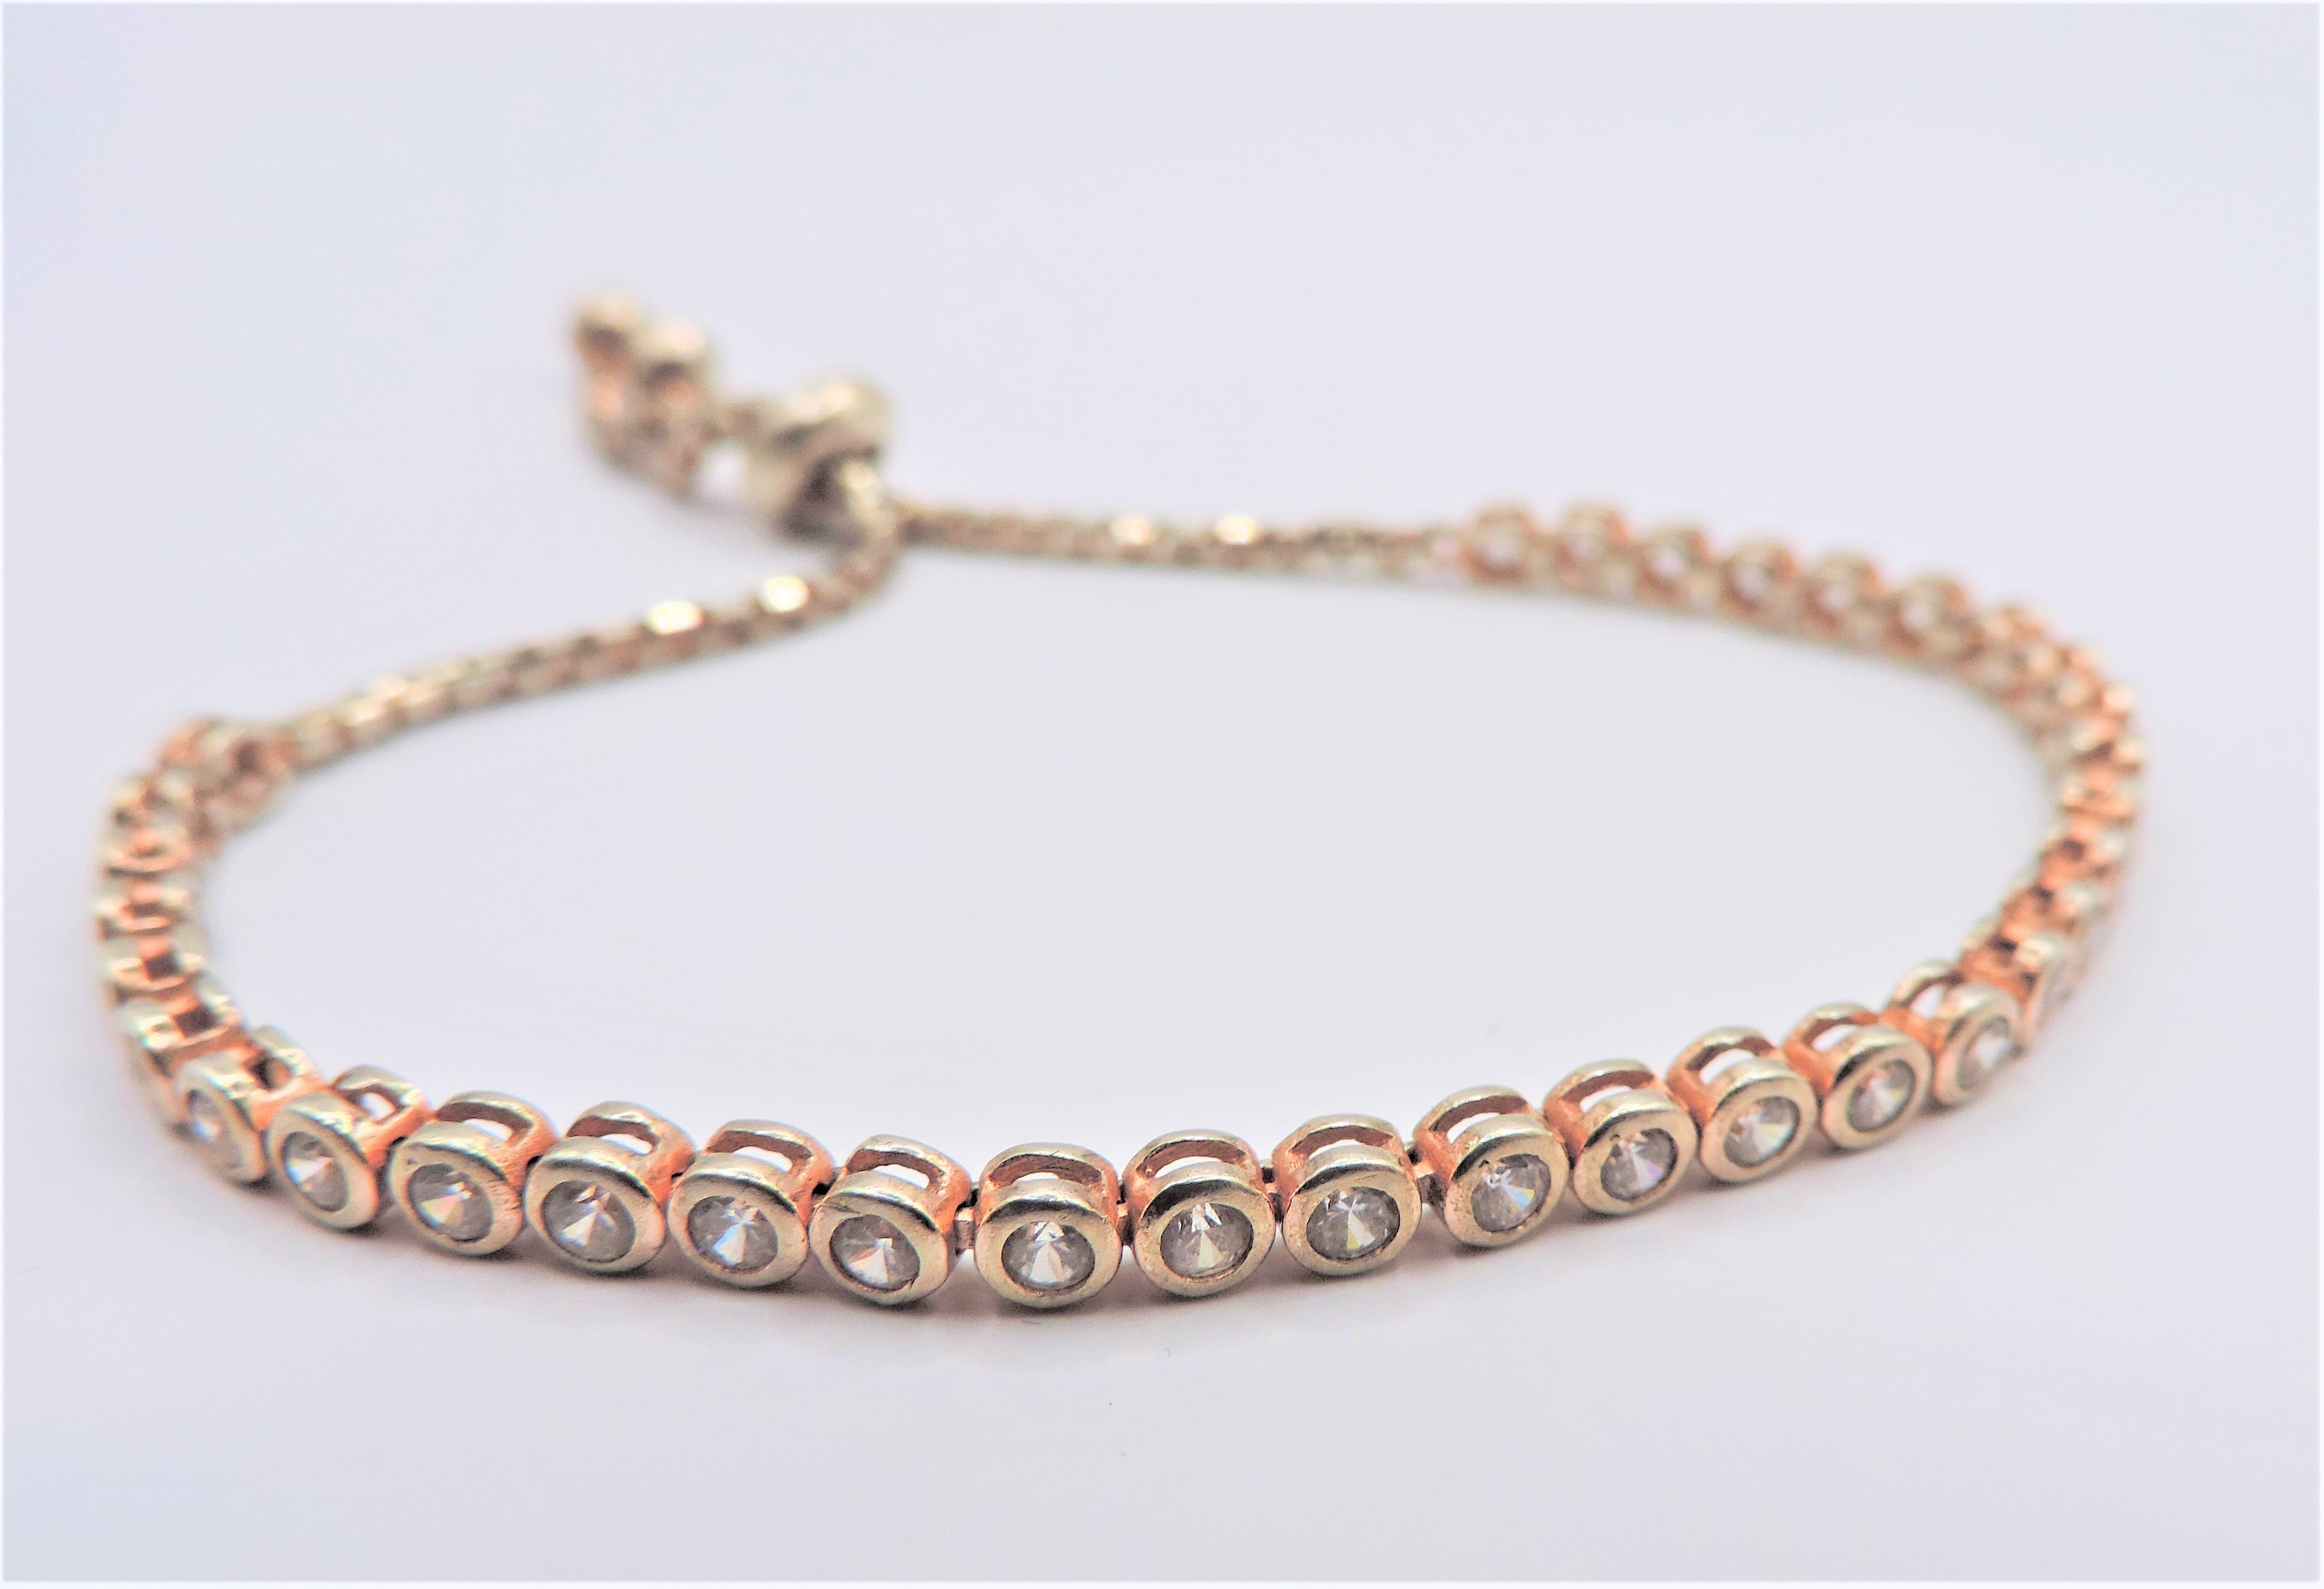 Rose Gold Silver White Topaz Bracelet New with Gift Box - Image 2 of 4